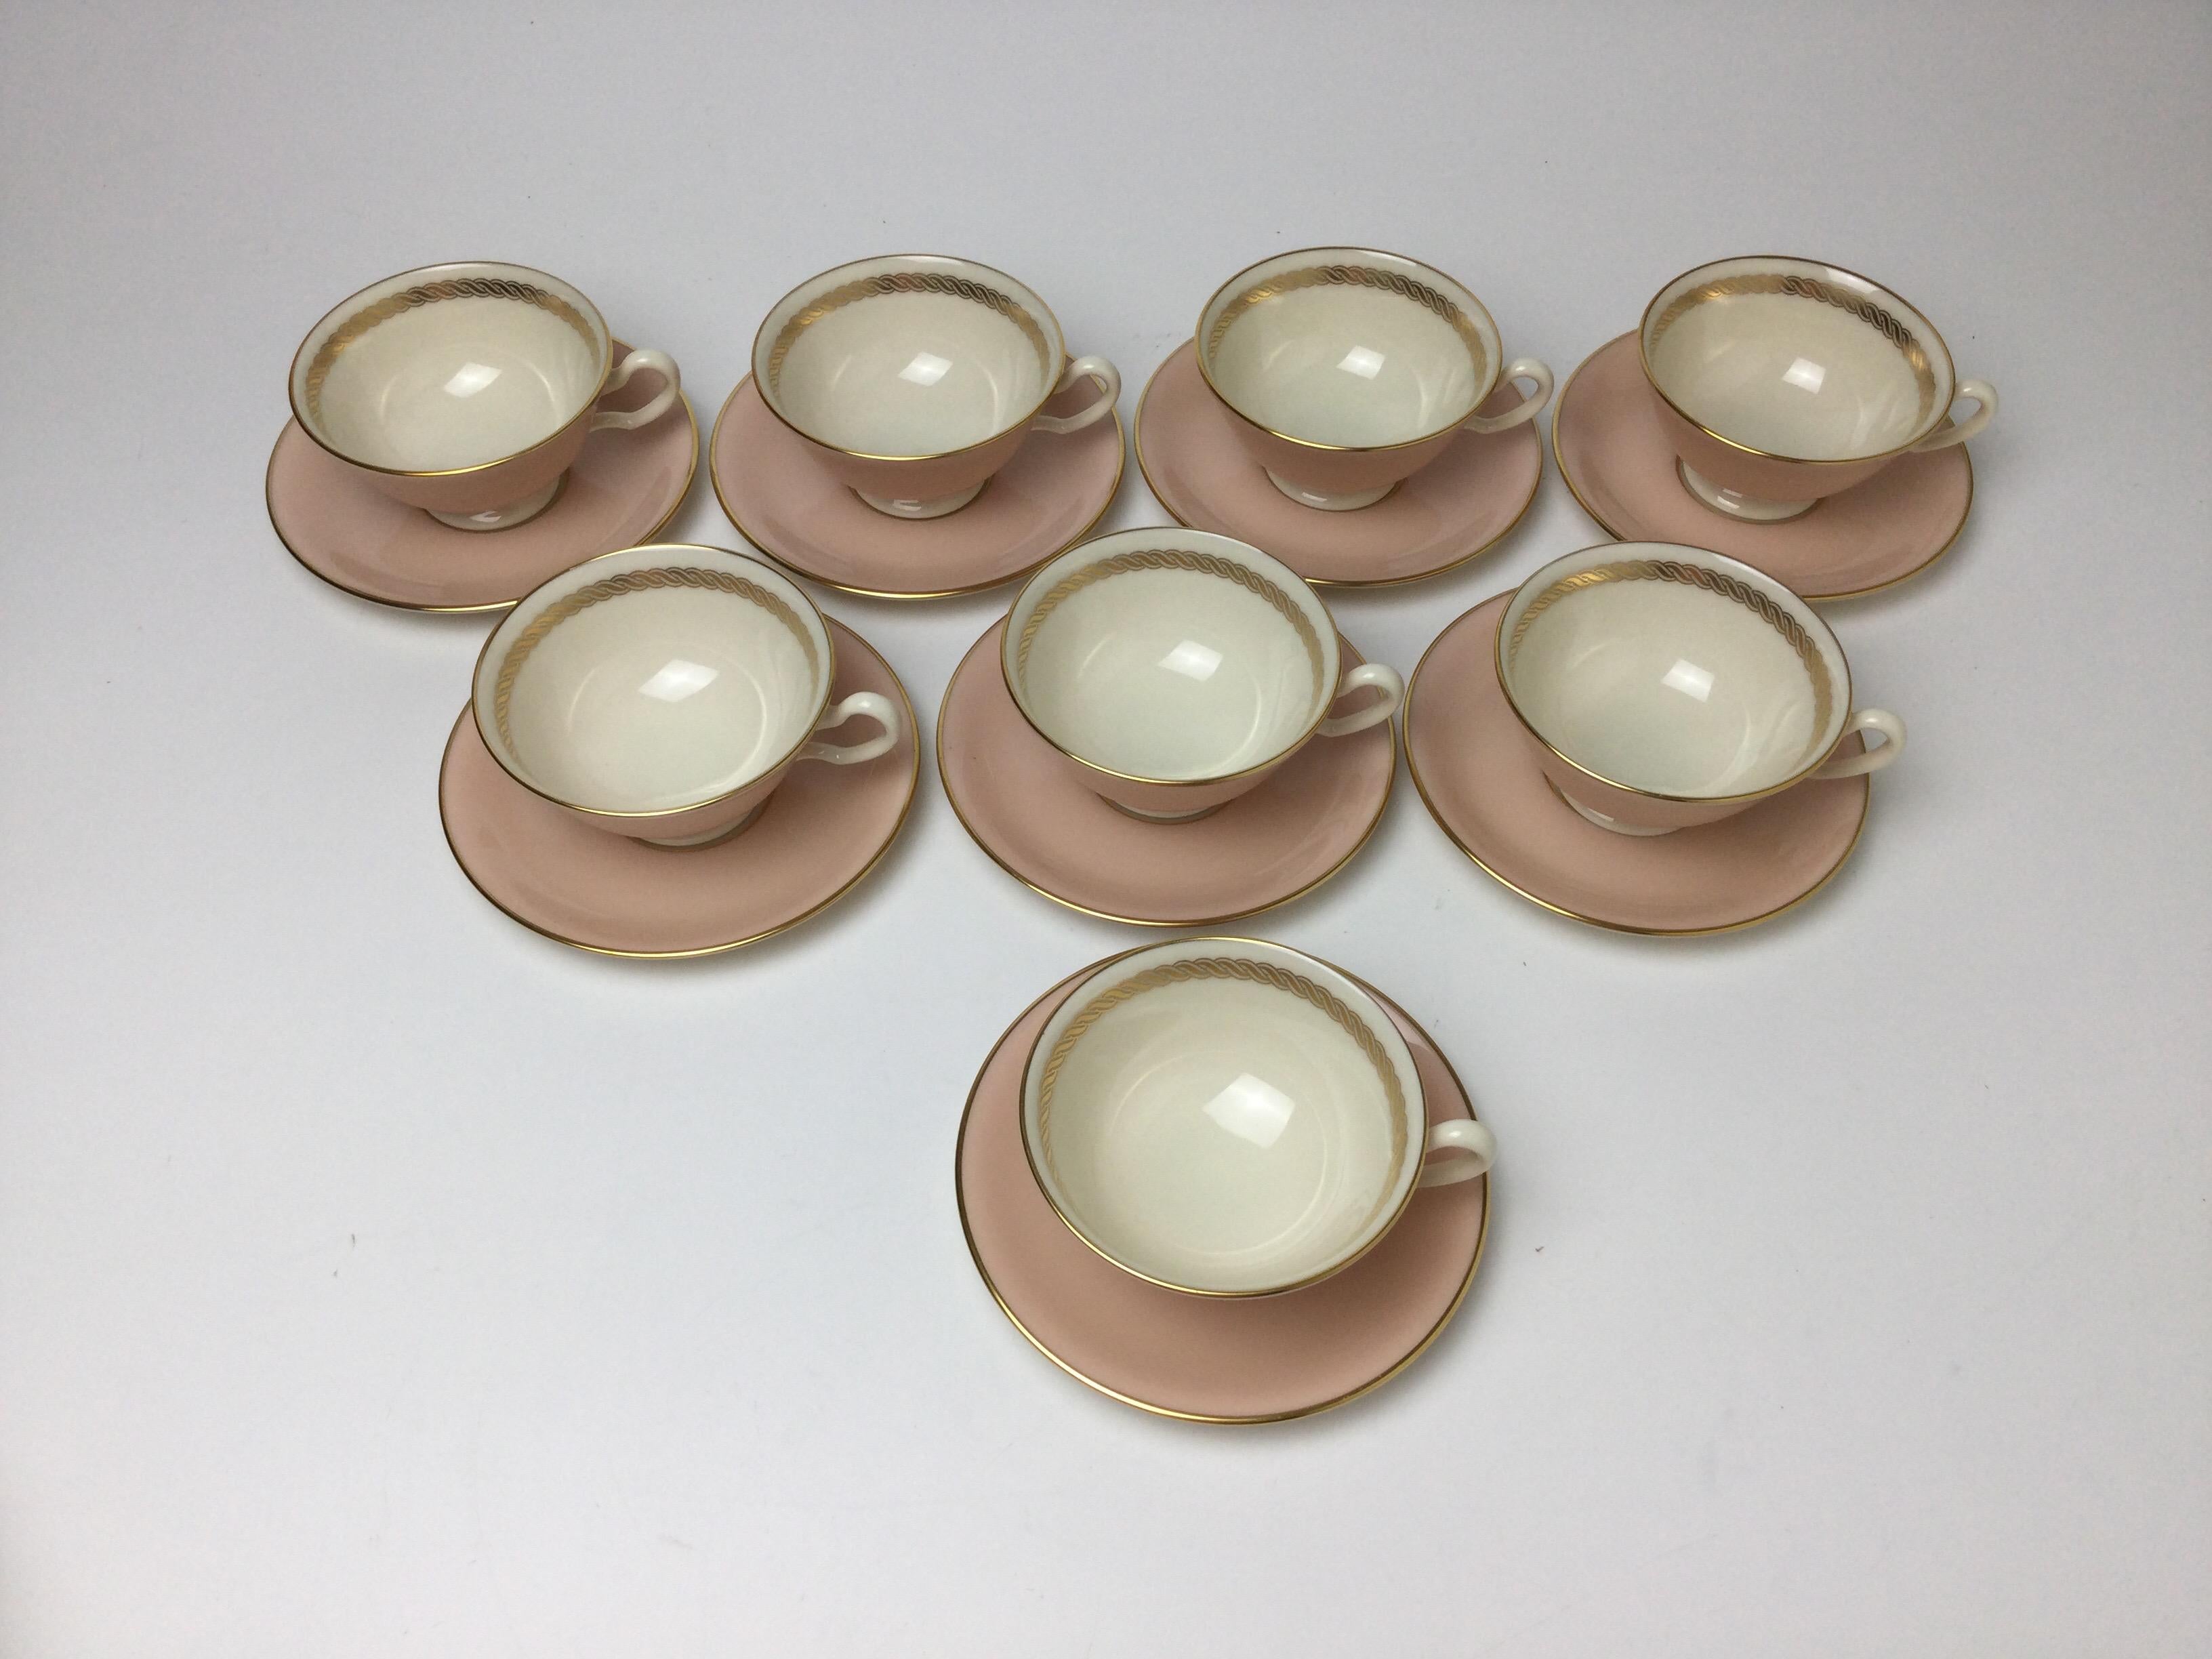 Set of 8 Lenox caribbee cups & saucers with pink and gilt borders. Saucers are 5 3/4